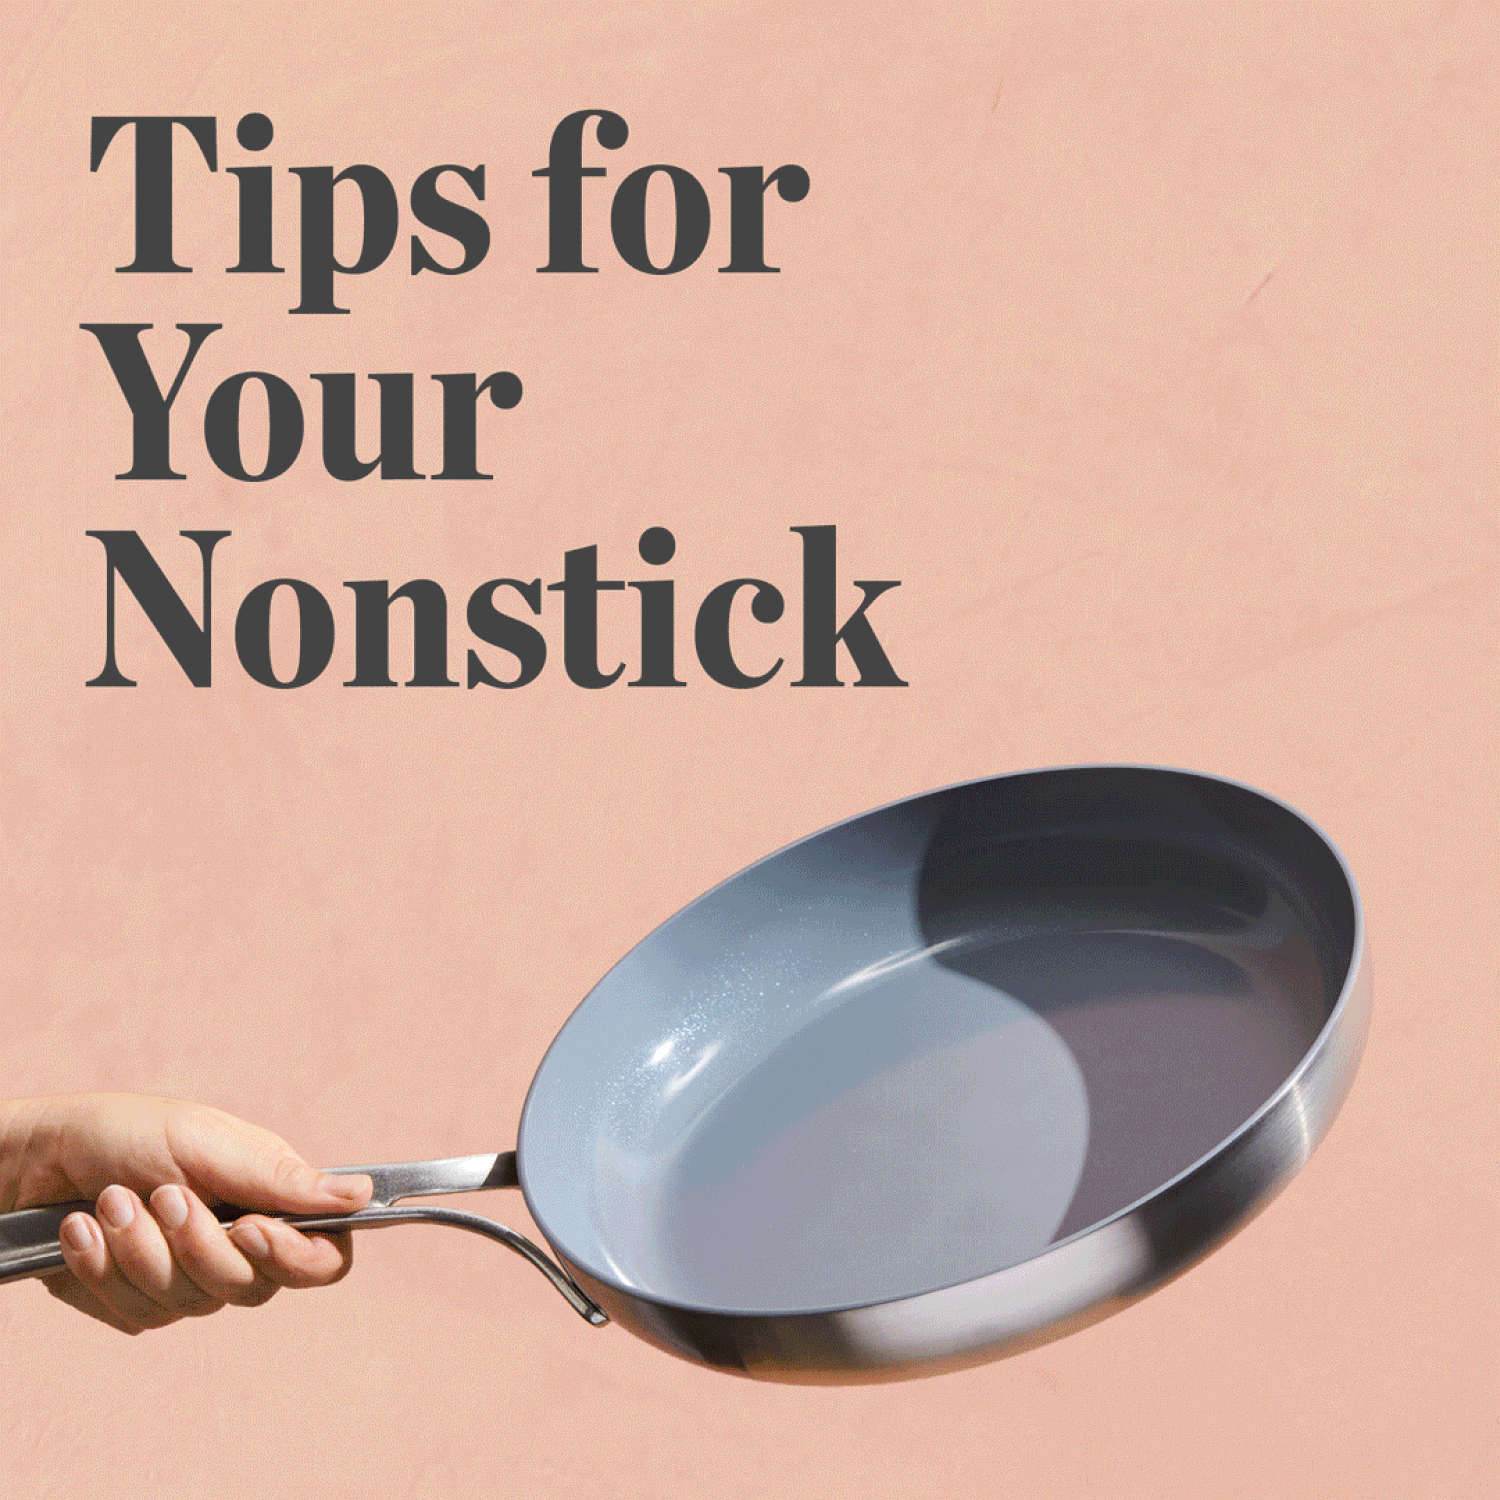 Five Two Essential Cookware Set from Food52, Nonstick & Stainless Steel on  Food52